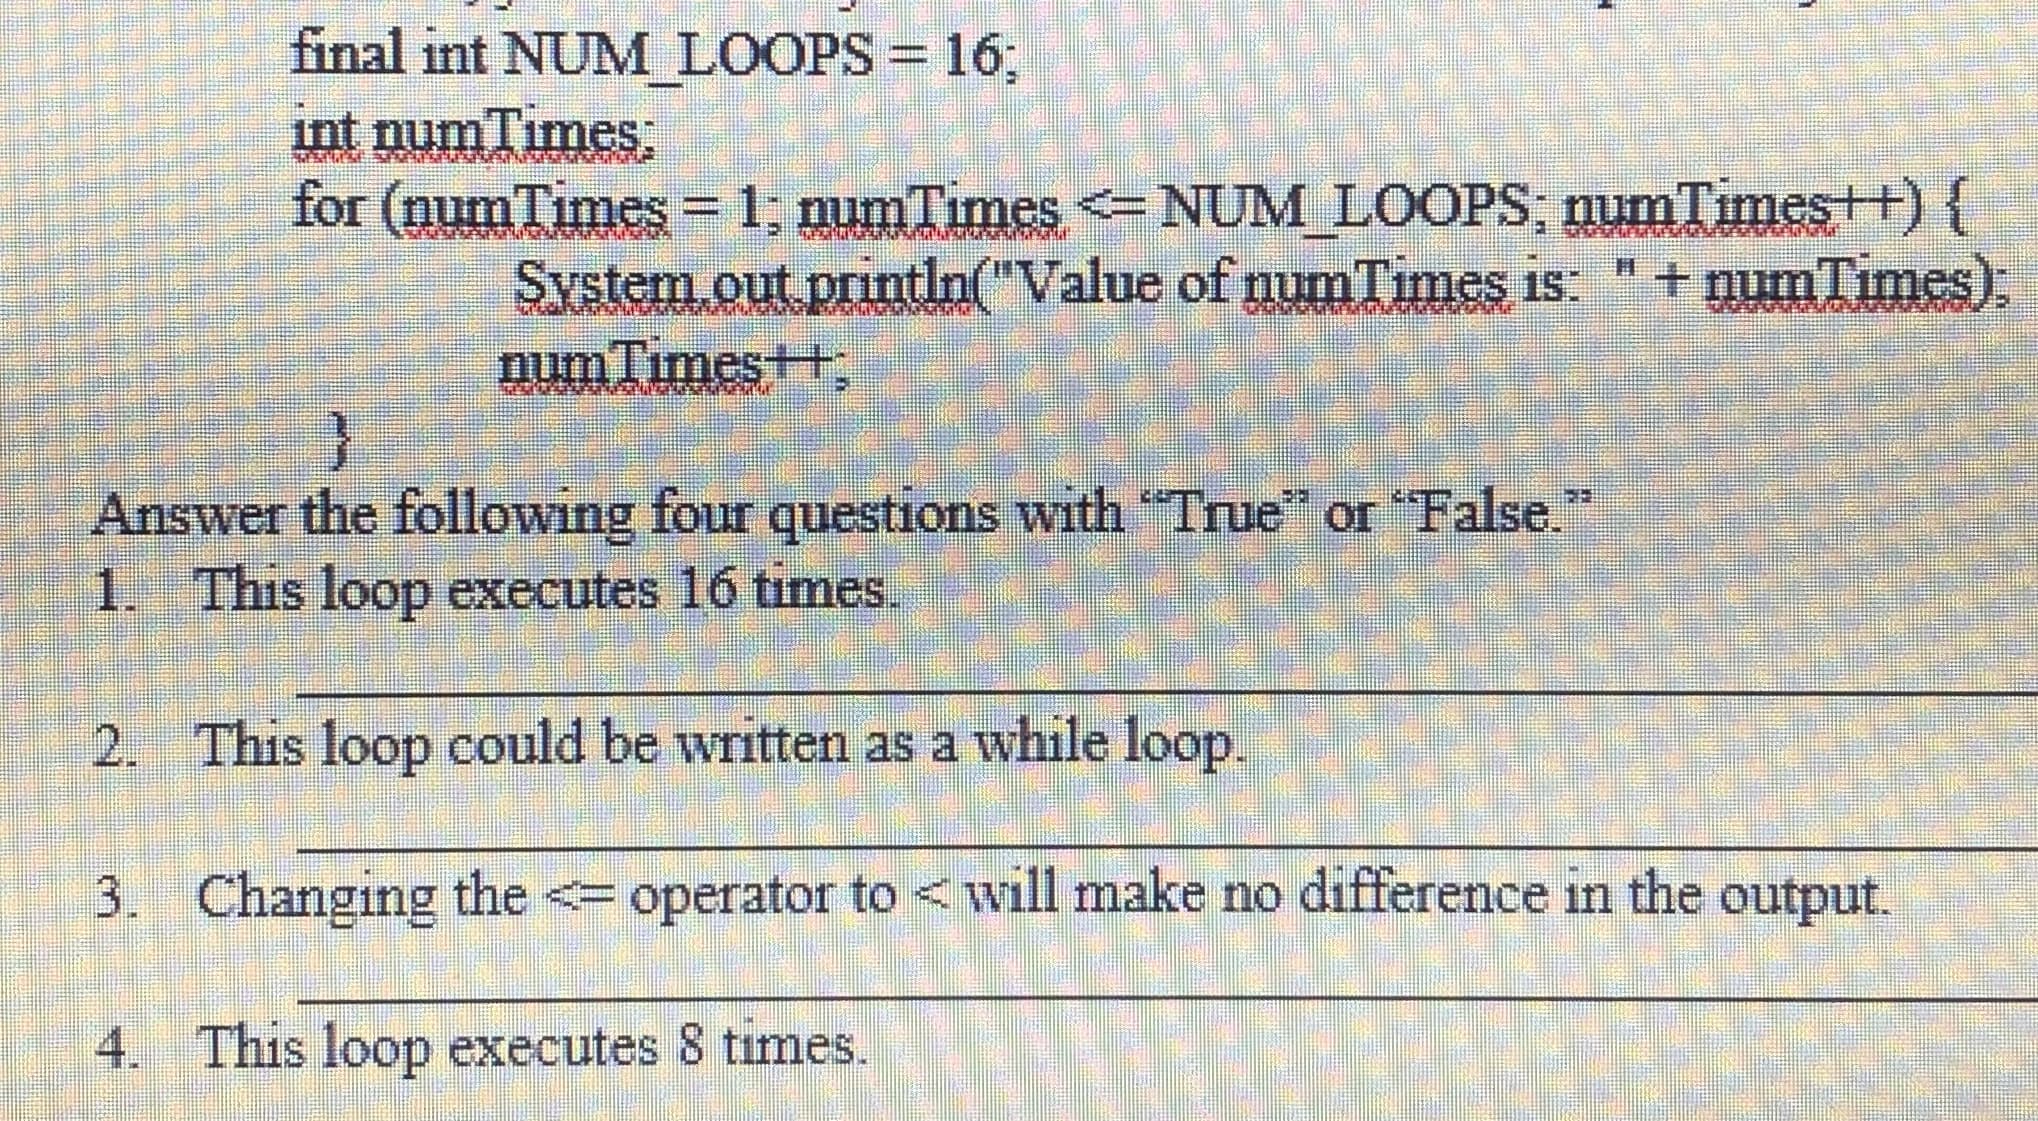 final int NUM LOOPS = 16;
int numTimes
for (num Times= 1; numTimes =NUM LOOPS, numTimest+){
System.out println("Value of numTimes is: " + numTumes).
numTimes+t,
Answer the following four questions with "True" or "False.
1. This loop executes 16 times.
2. This loop could be written as a while loop.
3. Changing the <= operator to < will make no difference in the output.
4. This loop executes 8 times.
